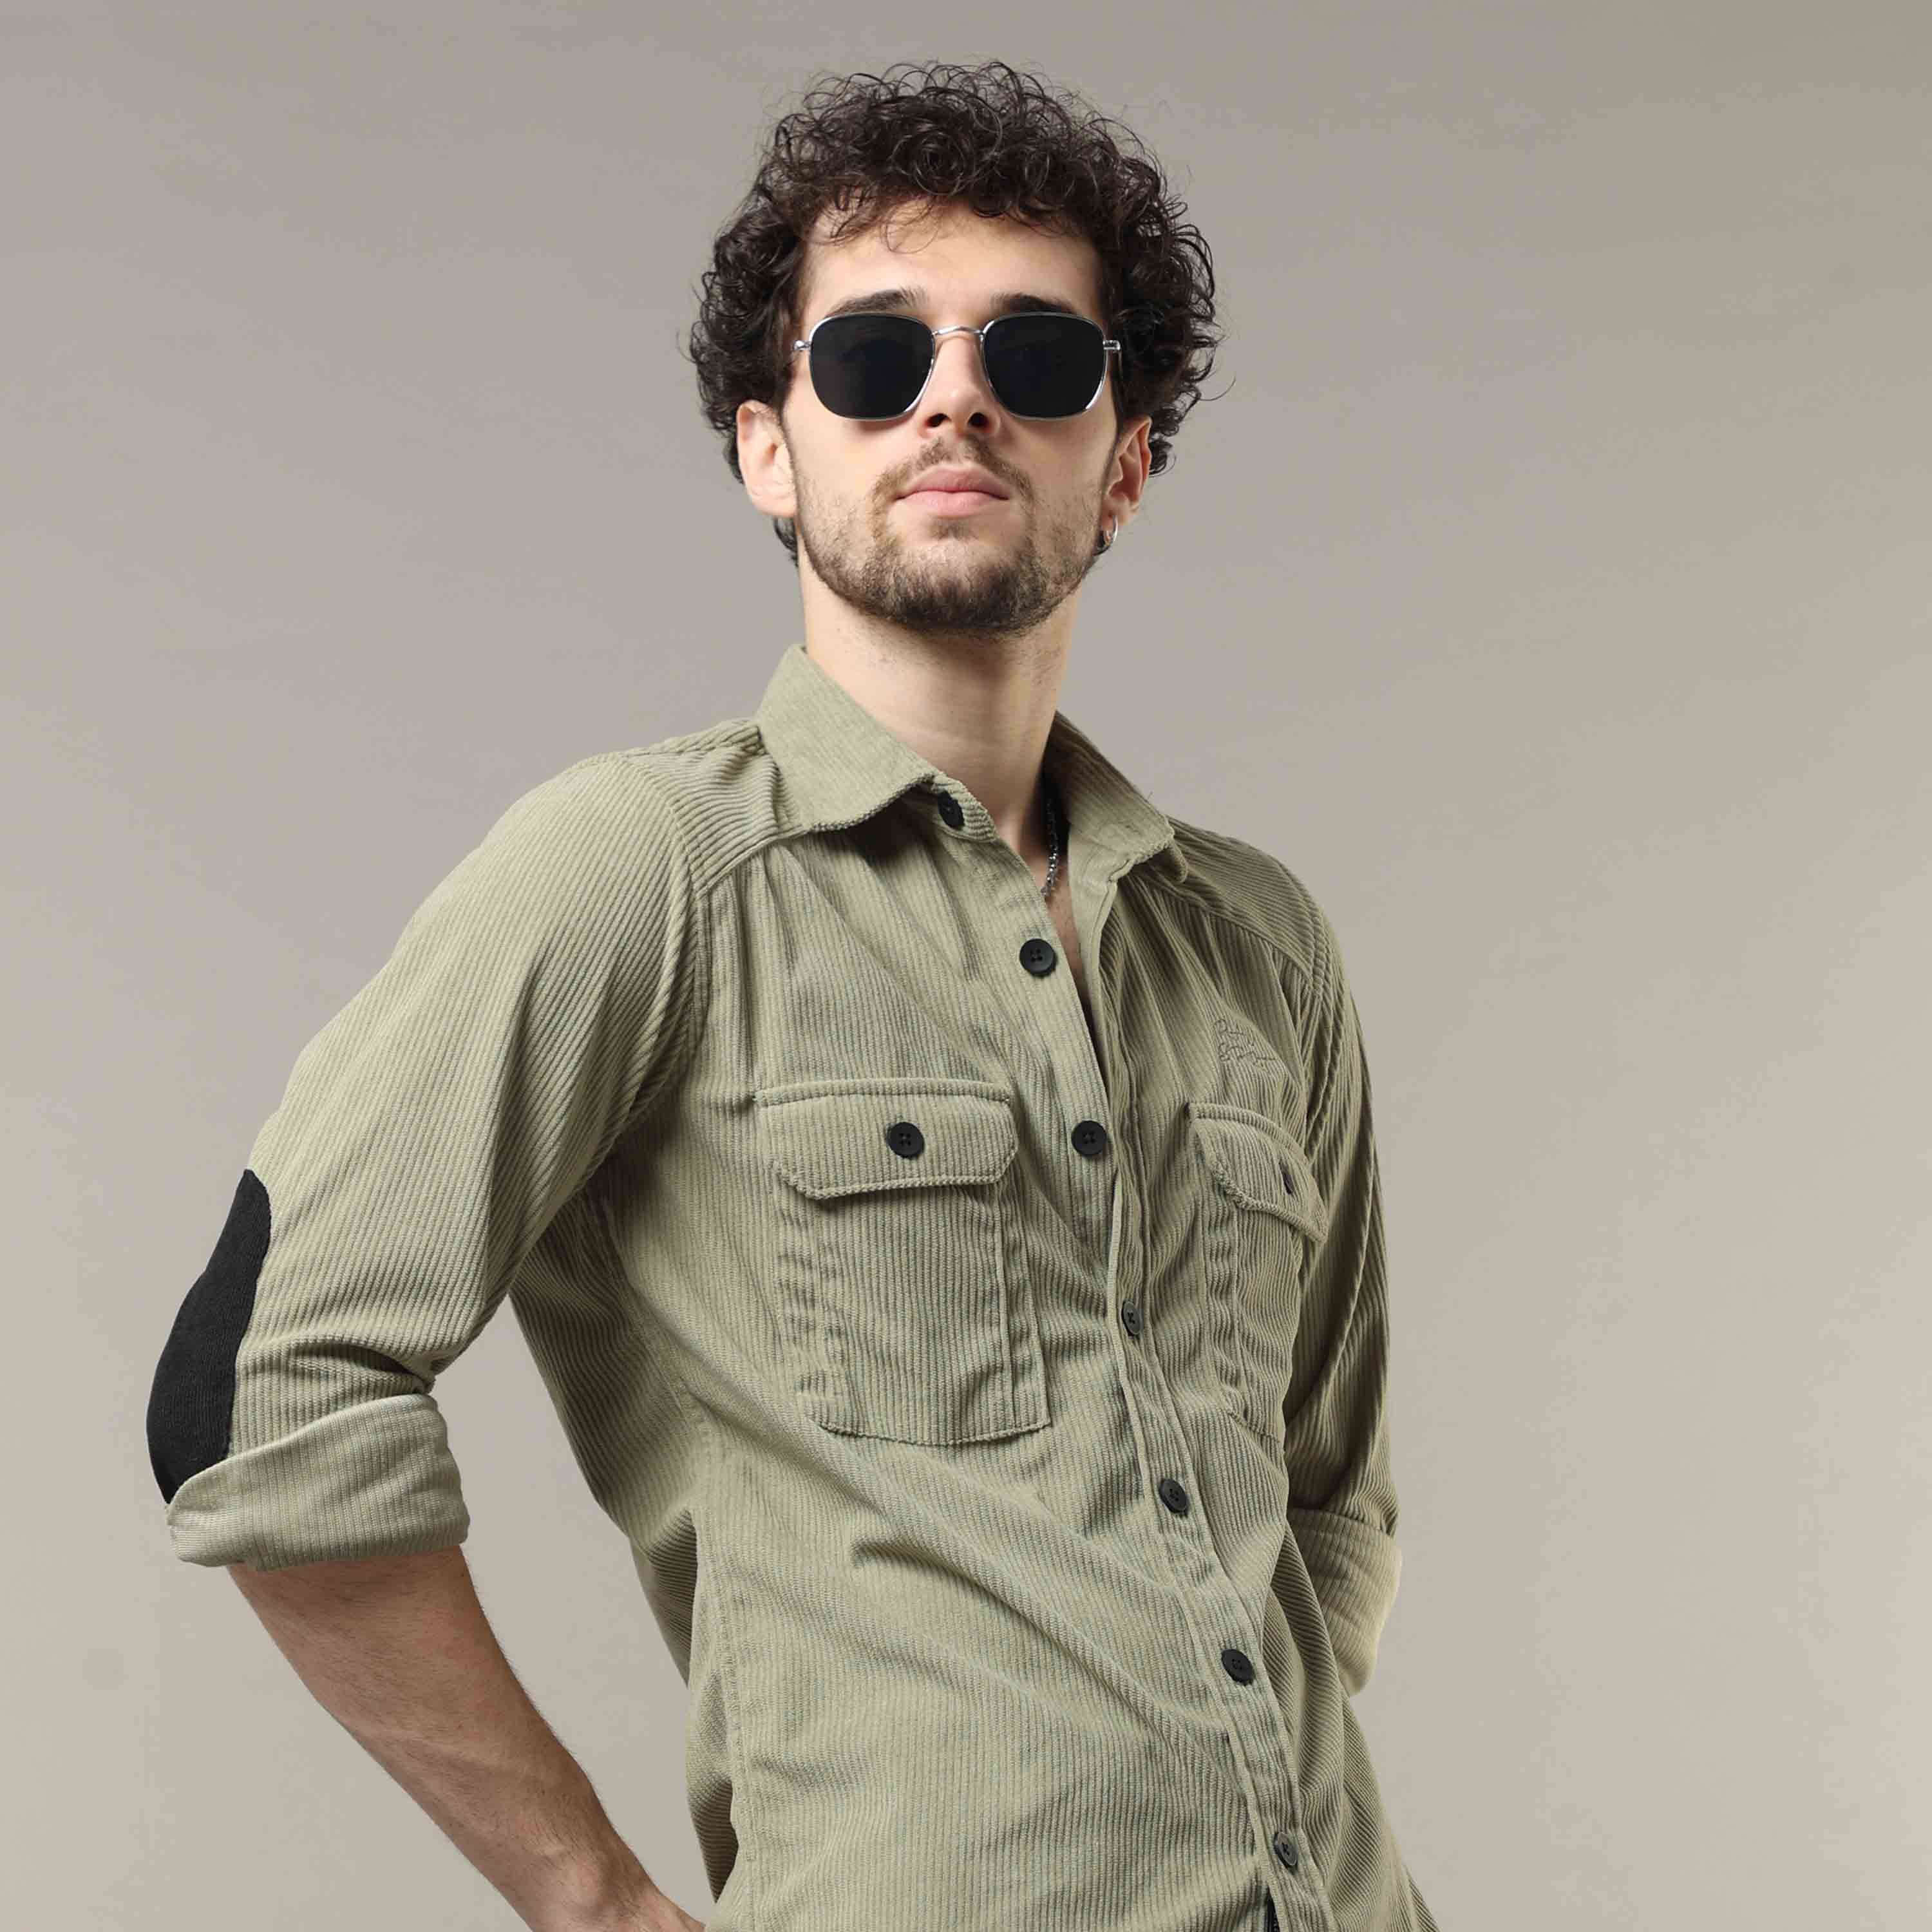 Shop Stylish Lime Green Corduroy Shirt Online In IndiaRs. 1499.00